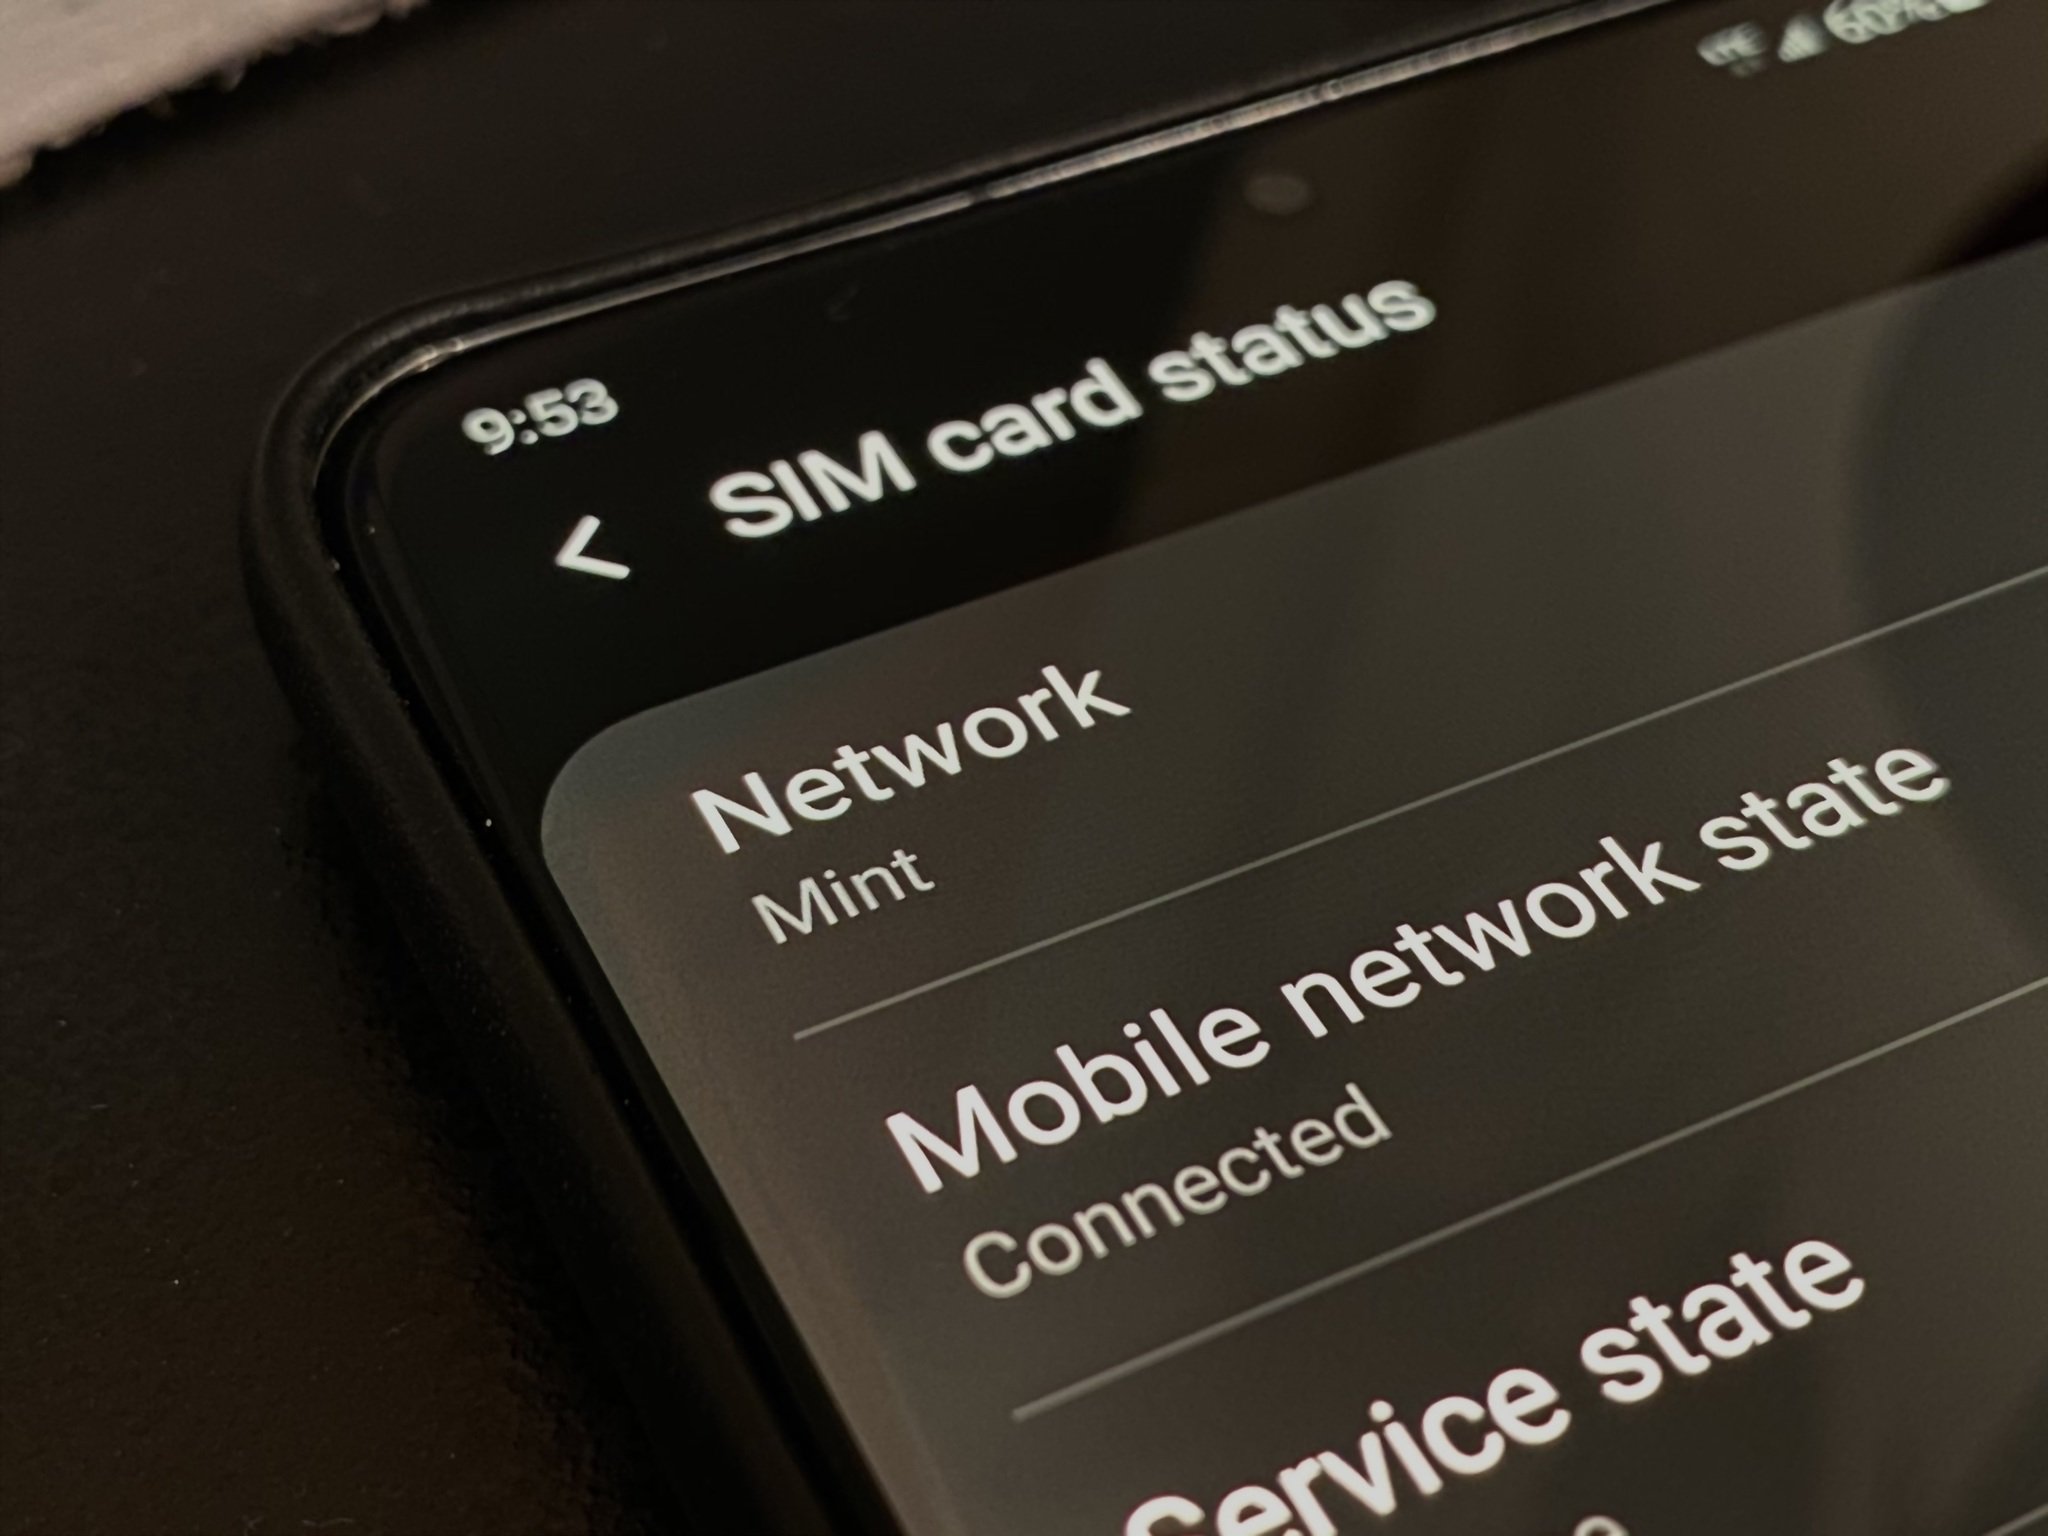 How to port your number to Mint Mobile